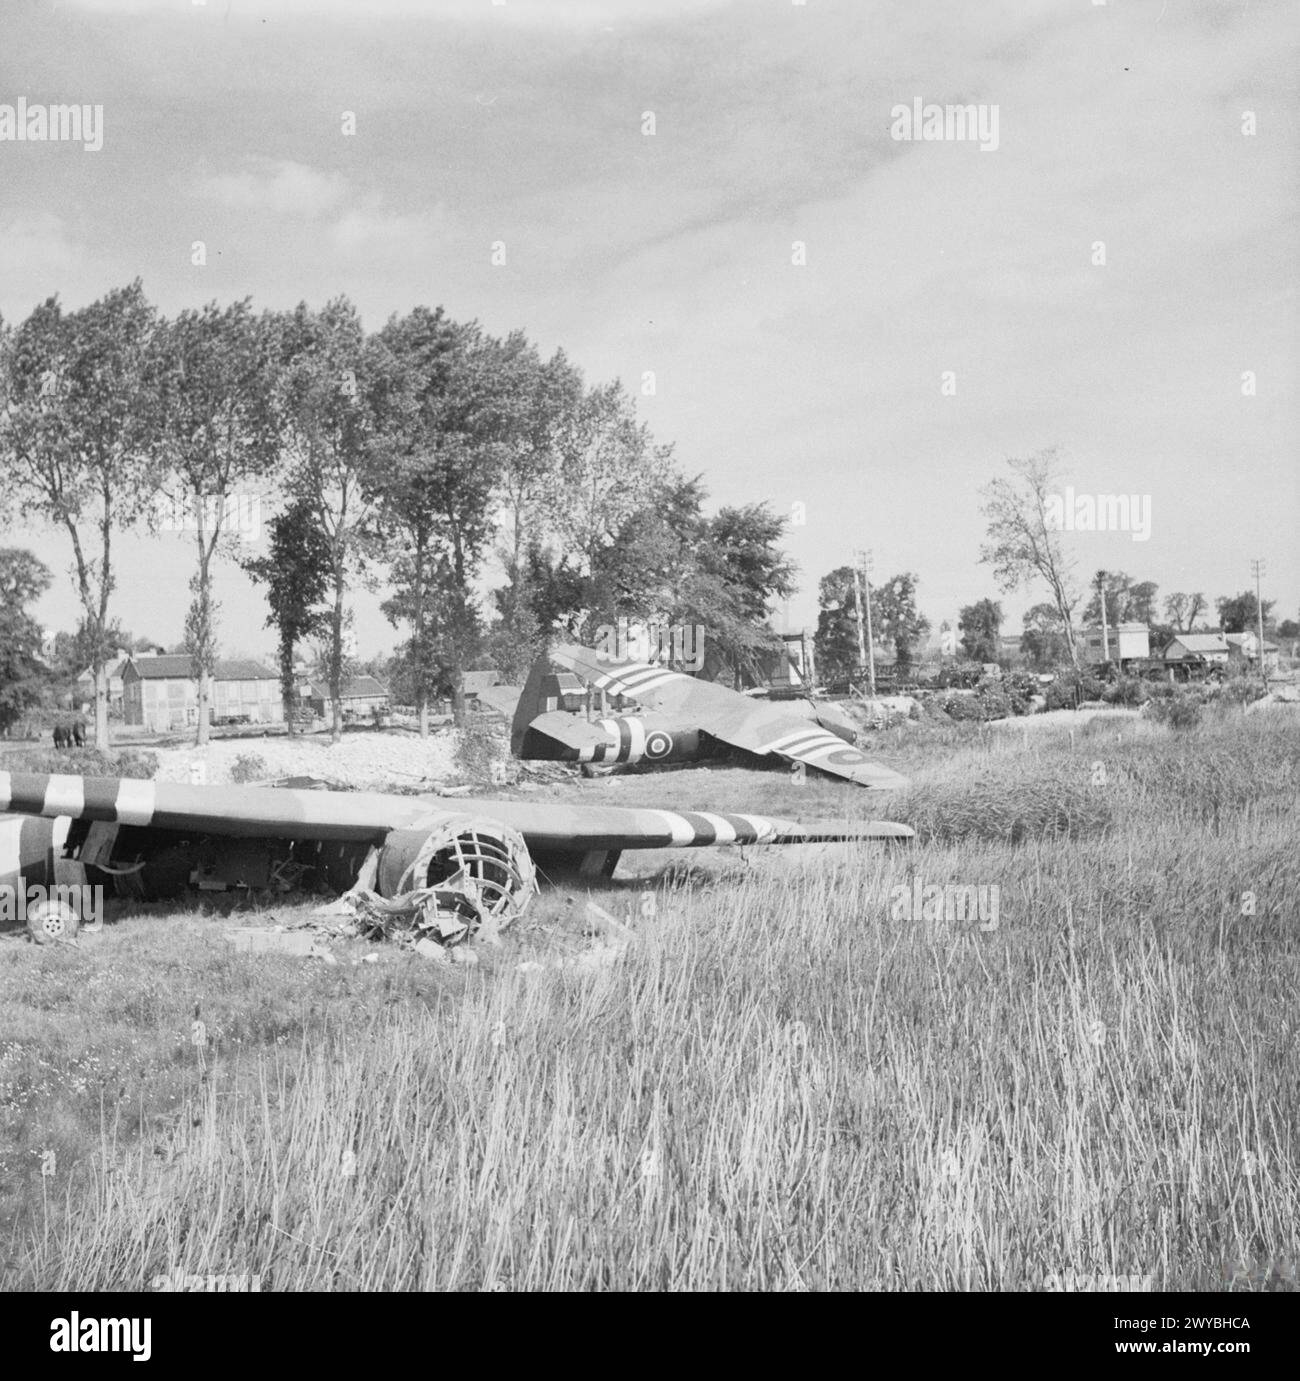 THE BRITISH ARMY IN THE NORMANDY CAMPAIGN 1944 - Horsa gliders near the Caen Canal bridge at Benouville, 8 June 1944, part of 6th Airborne Division's 'coup de main' force, carrying men of 'D' and 'B' Company, 2nd Battalion Oxfordshire and Buckinghamshire Light Infantry, which captured the bridges over the Orne River and Caen Canal in the early hours of D-Day. In the foreground is glider No. 93, which carried Lieutenant David Wood's platoon, with behind, glider No. 91, which carried the force commander, Major John Howard, and Lieutenant Den Brotheridge's platoon. , British Army, Oxfordshire and Stock Photo